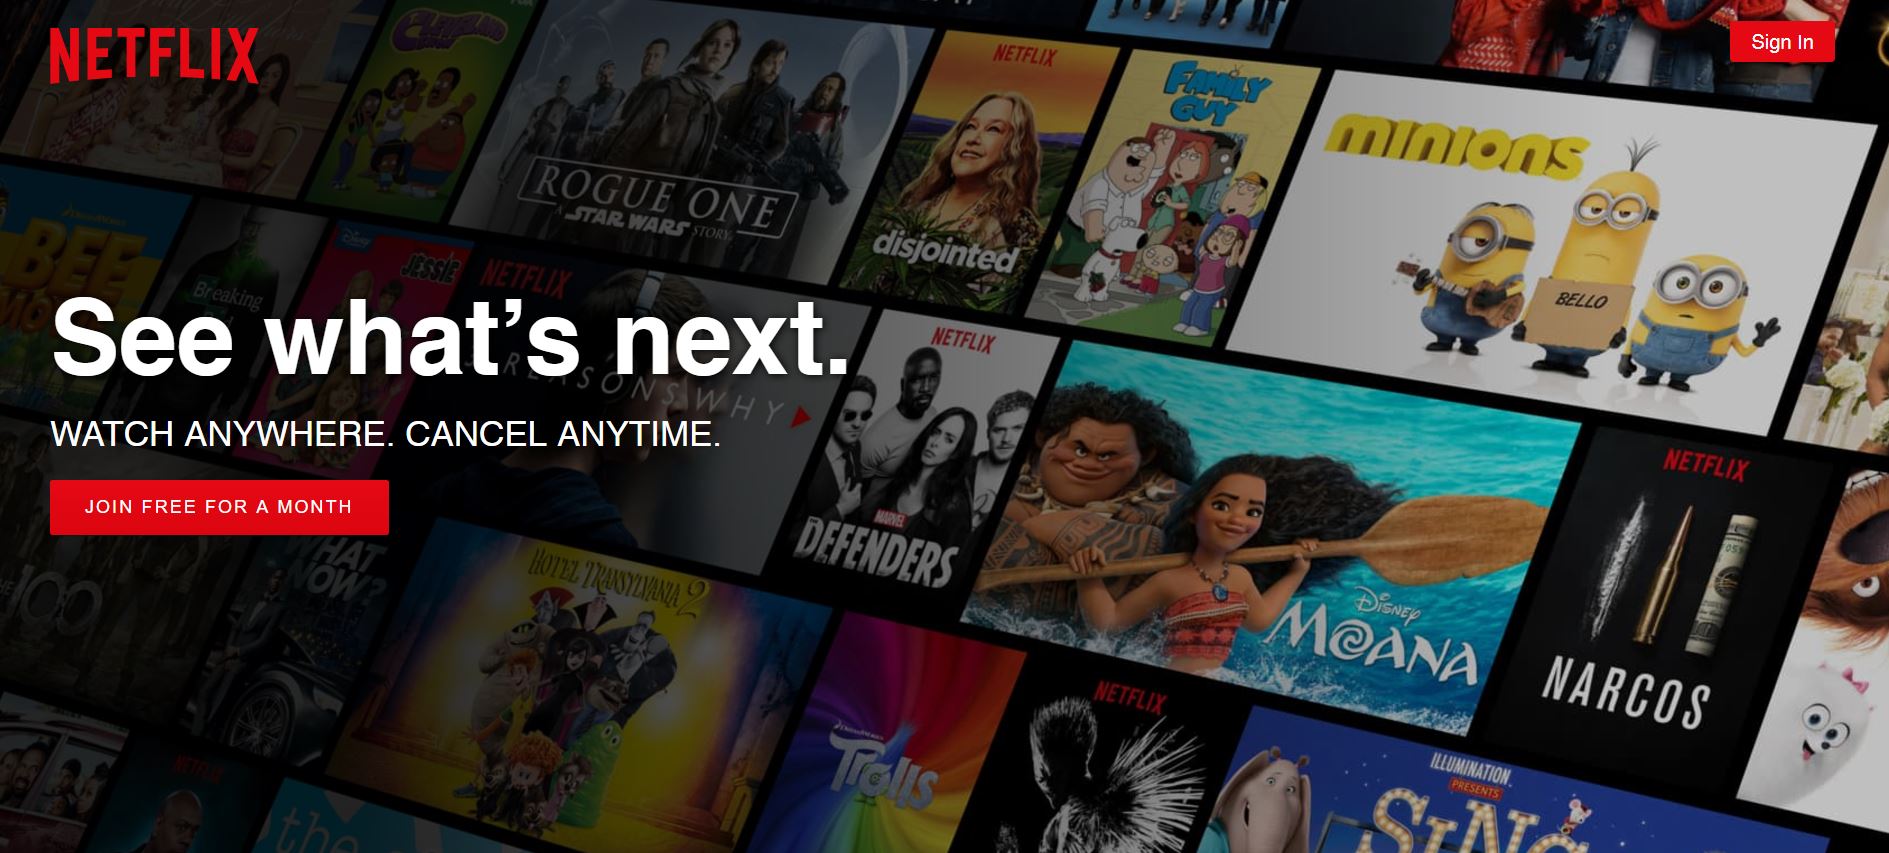 will netflix download in the background